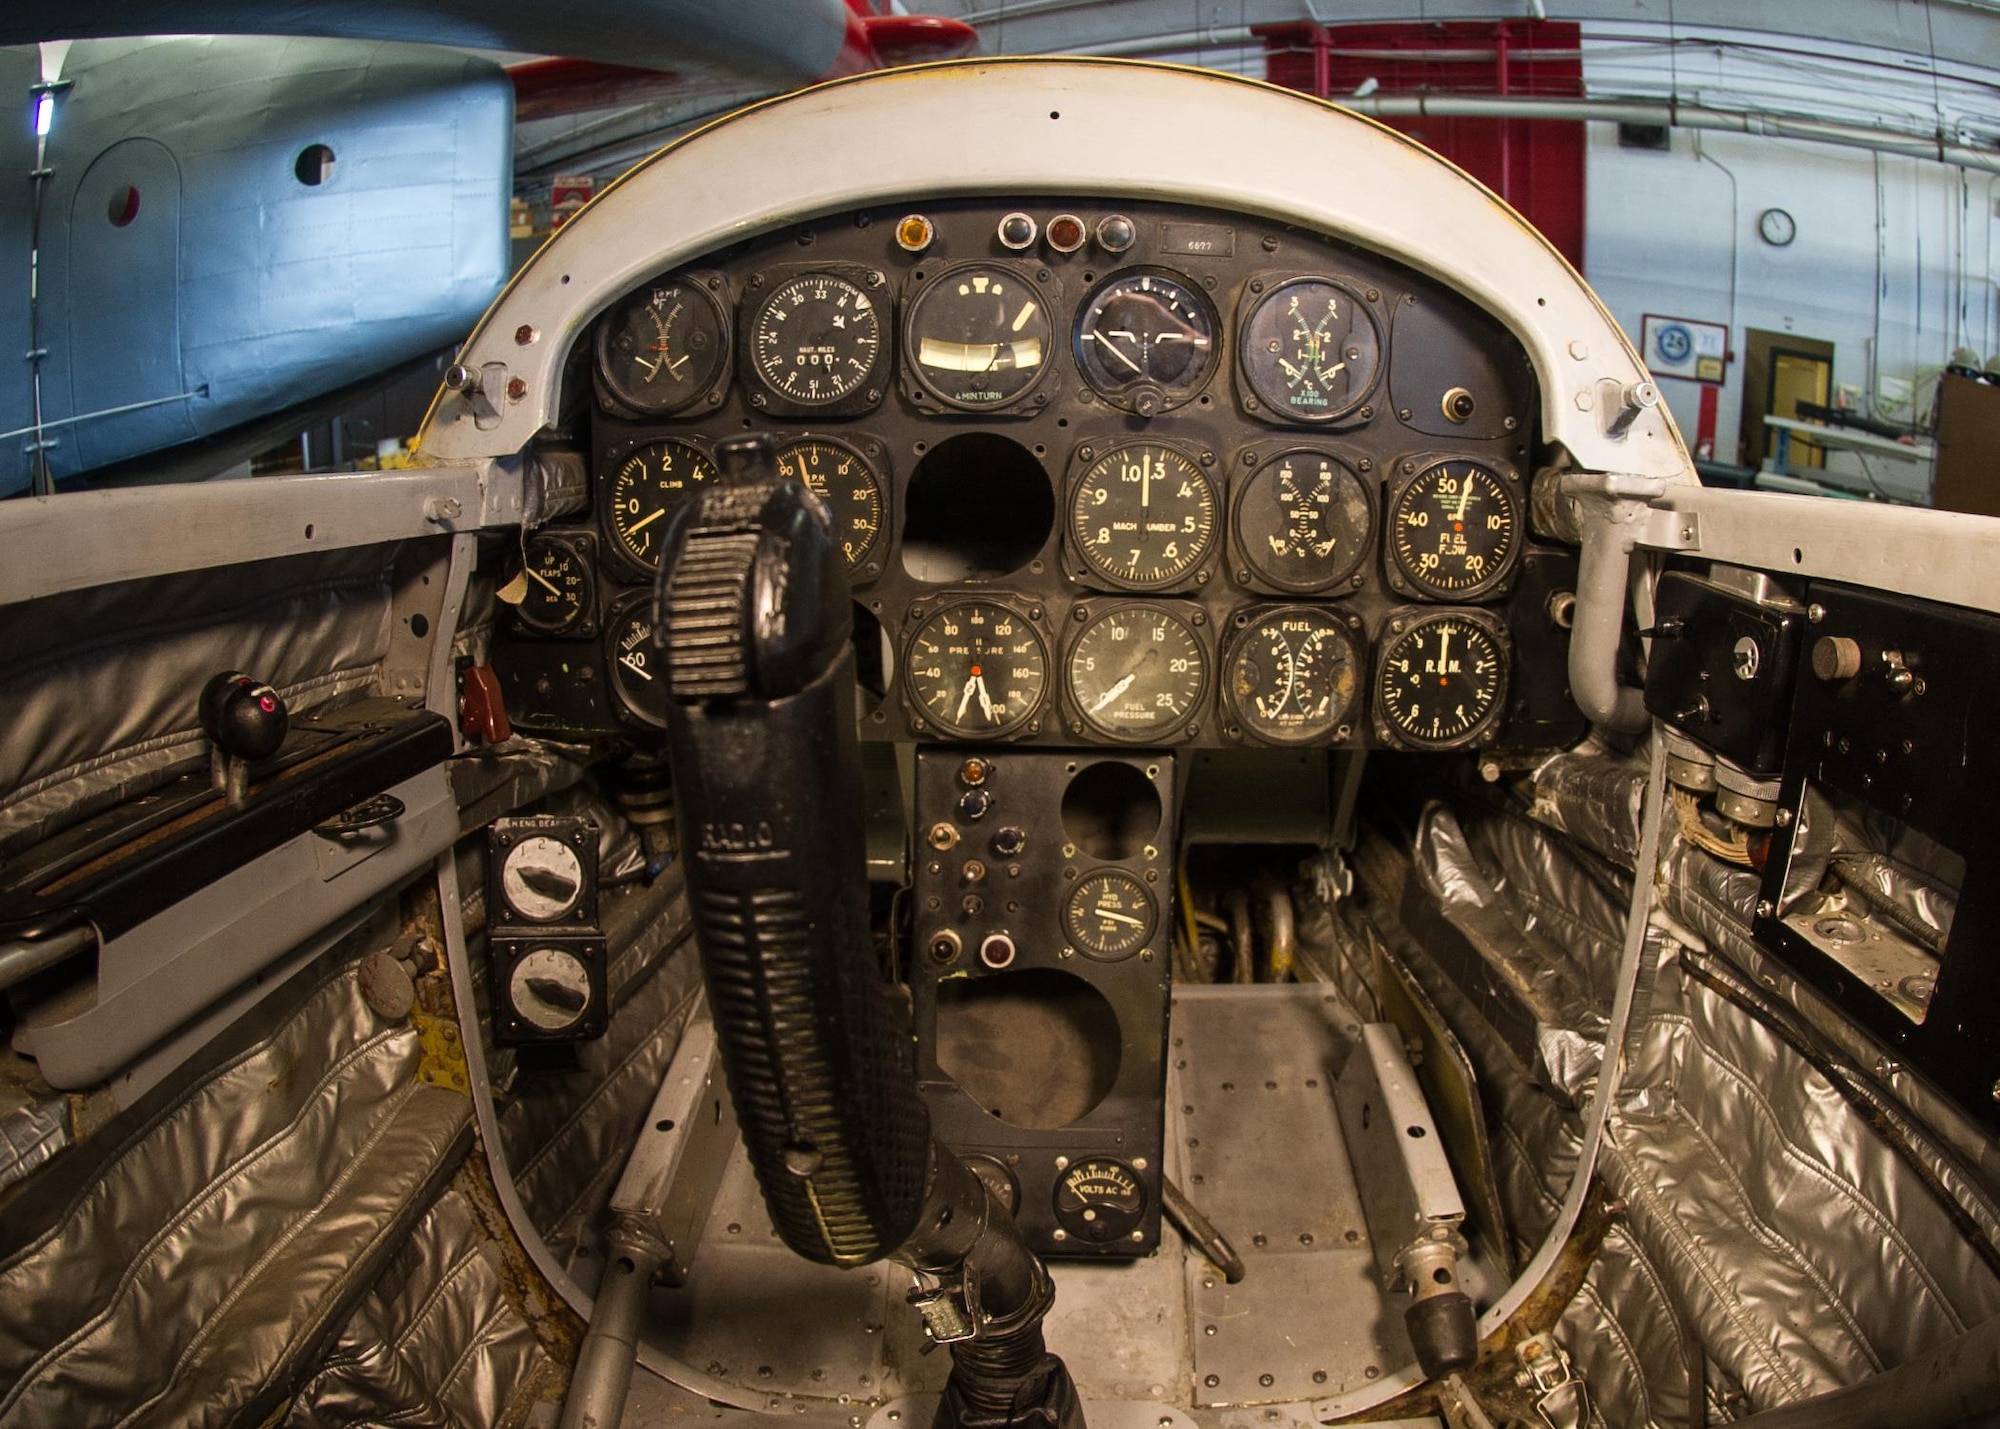 DAYTON, Ohio - Northrop X-4 cockpit at the National Museum of the U.S. Air Force. (U.S. Air Force photo)